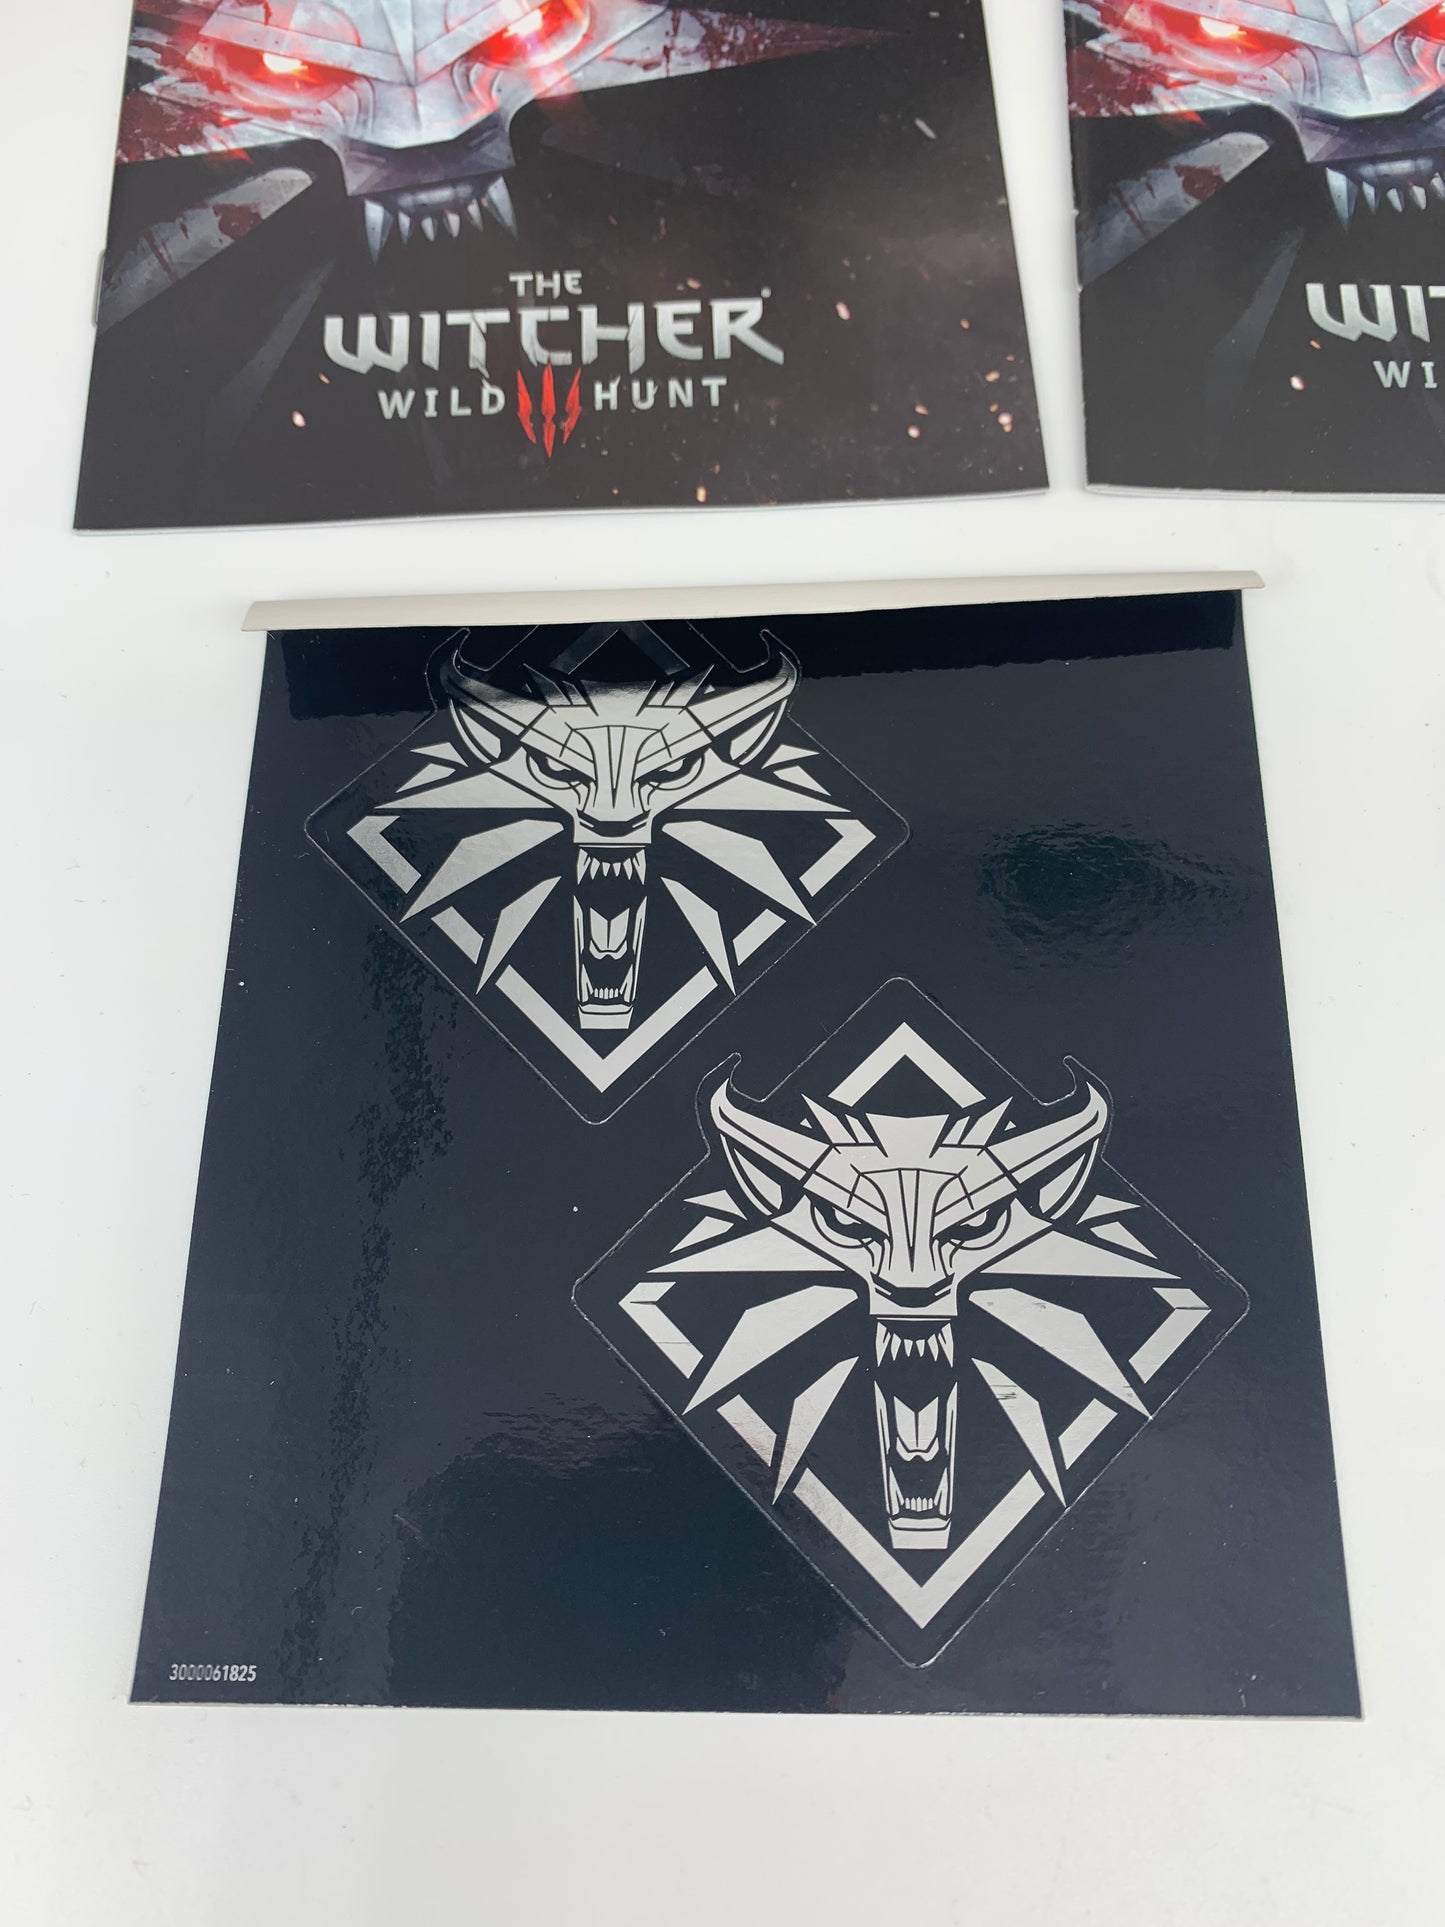 NiNTENDO SWiTCH | THE WiTCHER III WiLD HUNT | FULL EDITION